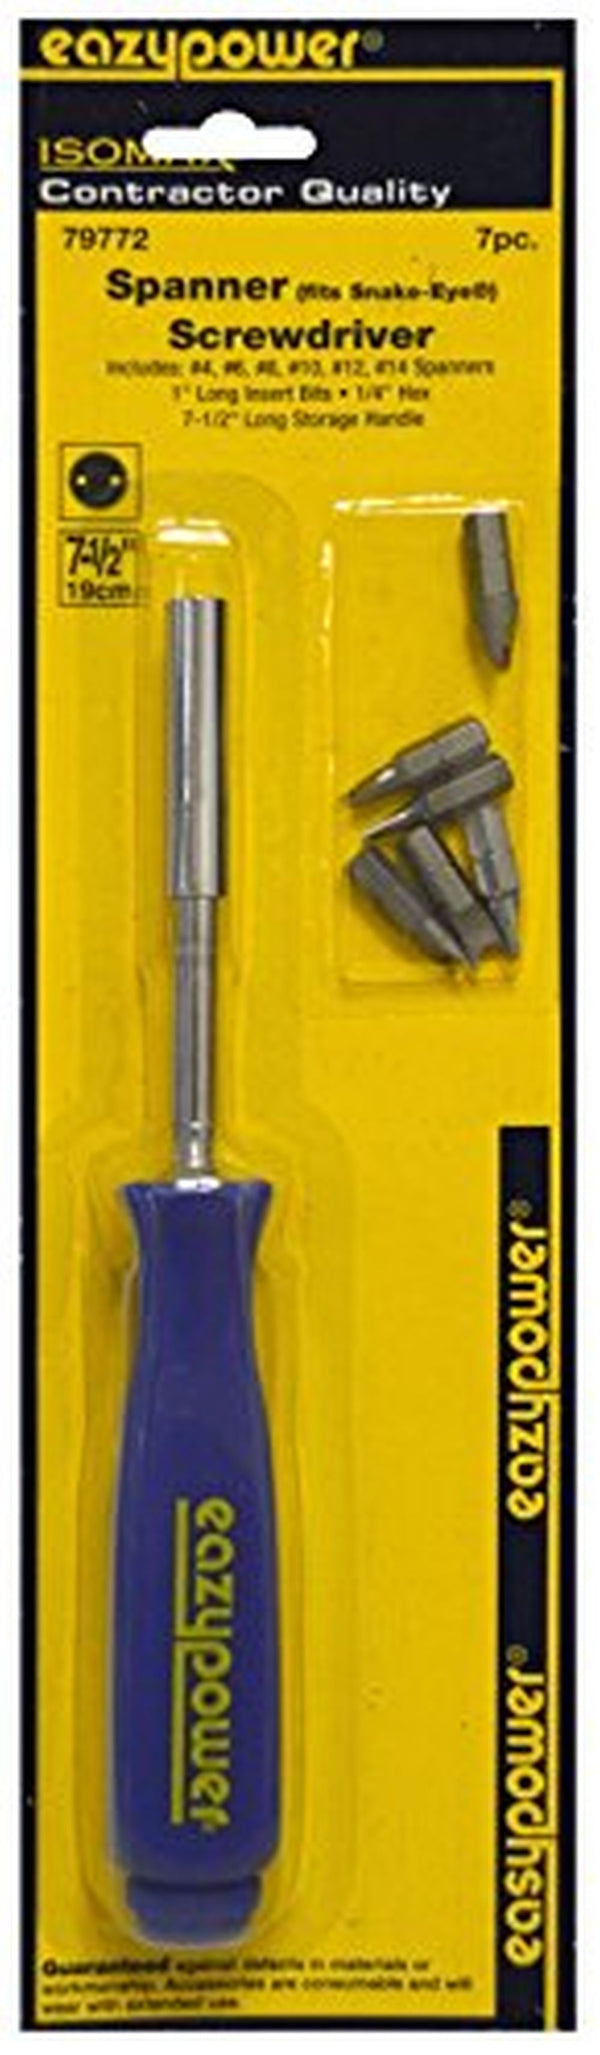 Eazypower 79772 7-1/2 in. Spanner Magnetic Screwdriver, 7 Piece Set